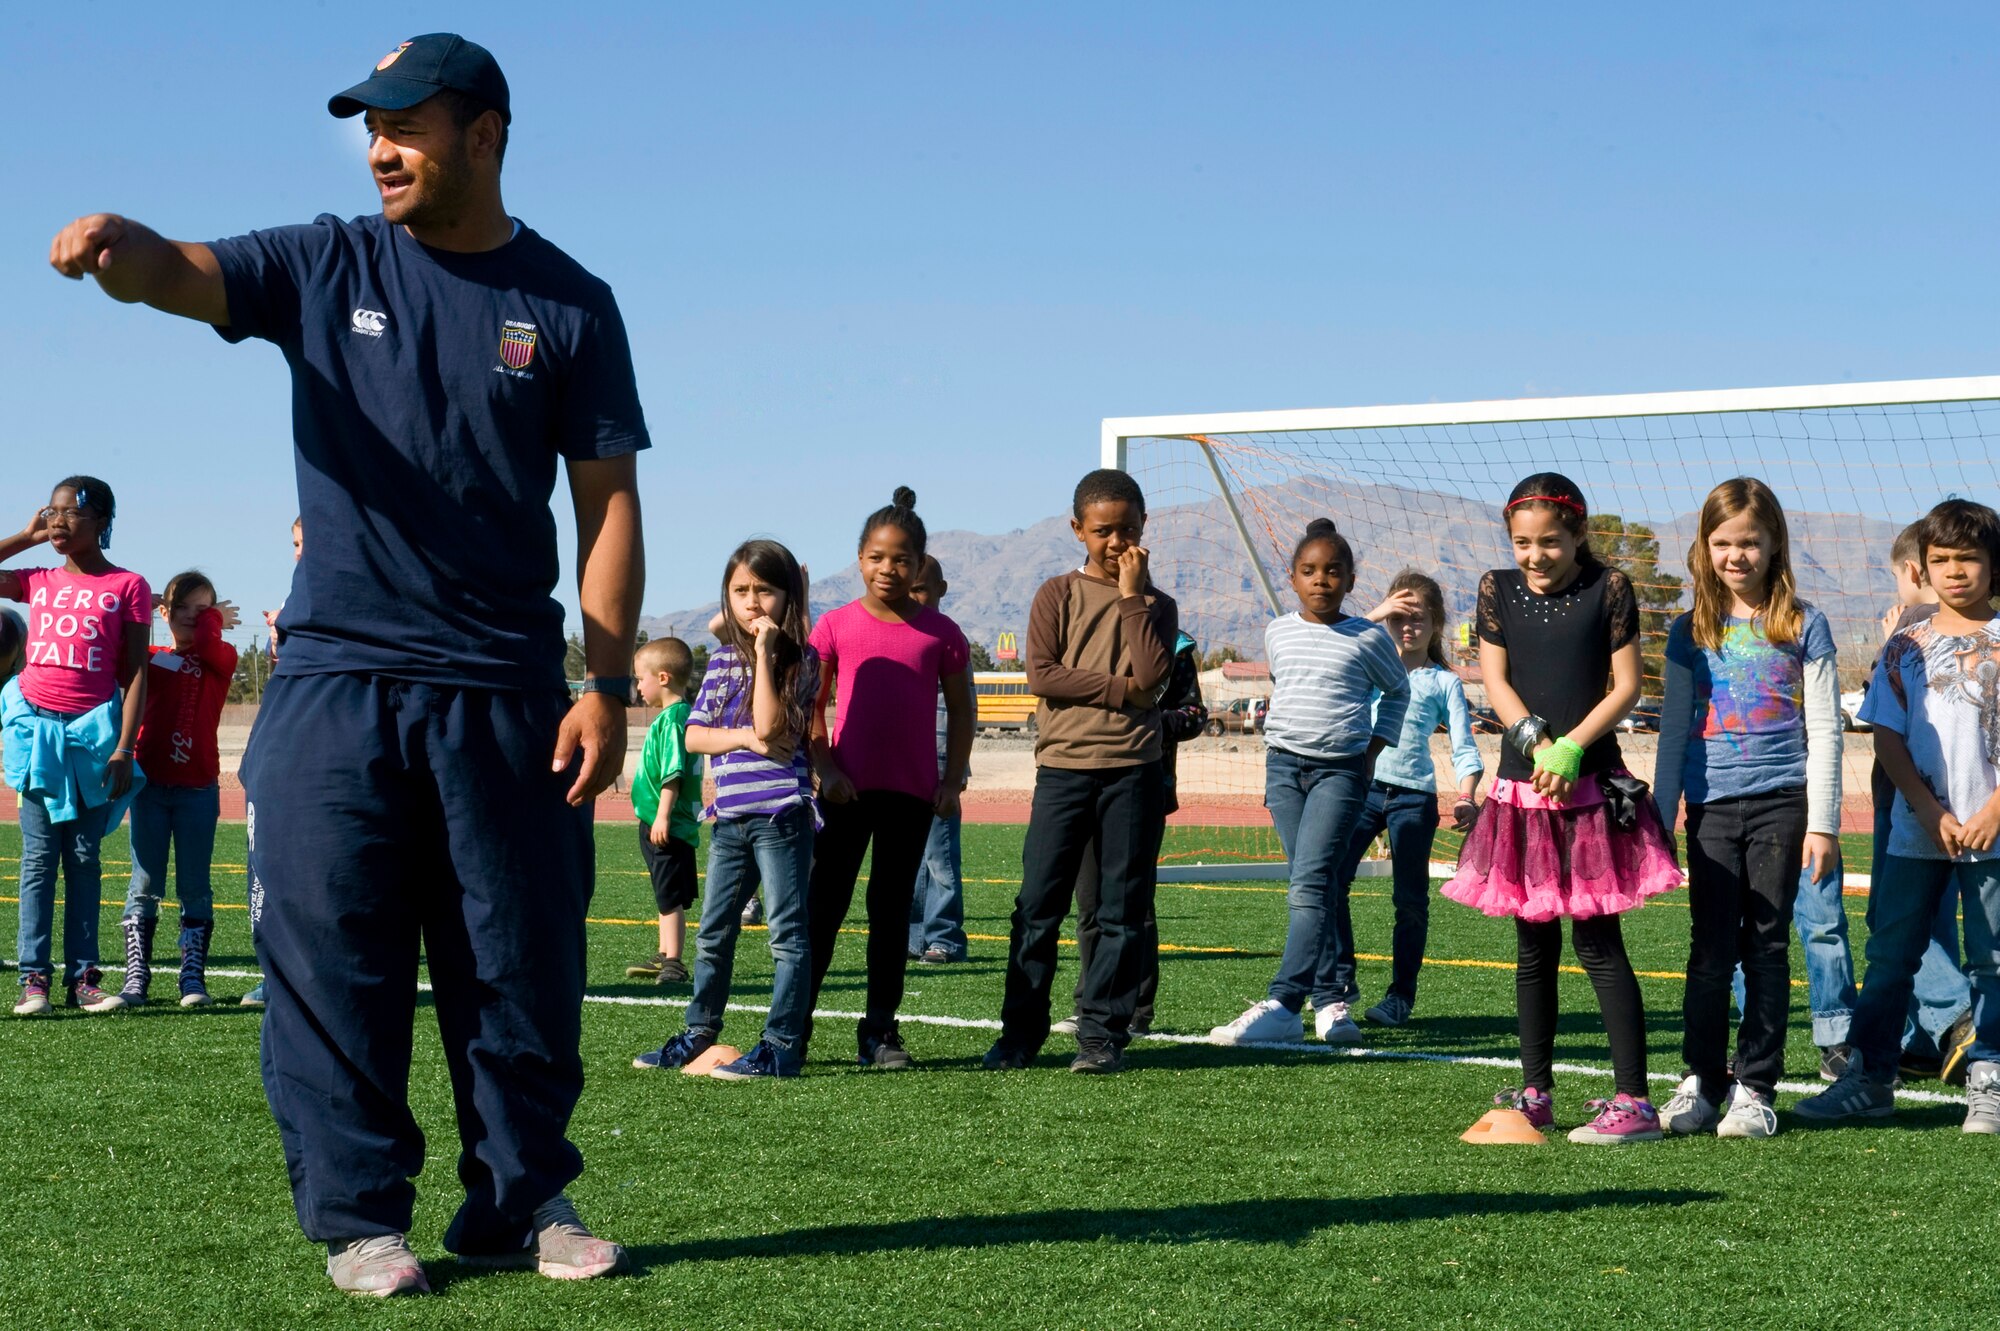 Vaha Esikia, USA Eagles Sevens player and coach, explains a lateral passing technique to Lomie Heard Elementary School students during the children's rugby clinic Feb. 6, 2013, at Nellis Air Force Base, Nev. Rugby sevens, also known as seven-a-side or VIIs, is a variant of rugby union in which teams are made up of seven players, instead of the usual 15. (U.S. Air Force photo by Senior Airman Matthew Lancaster)